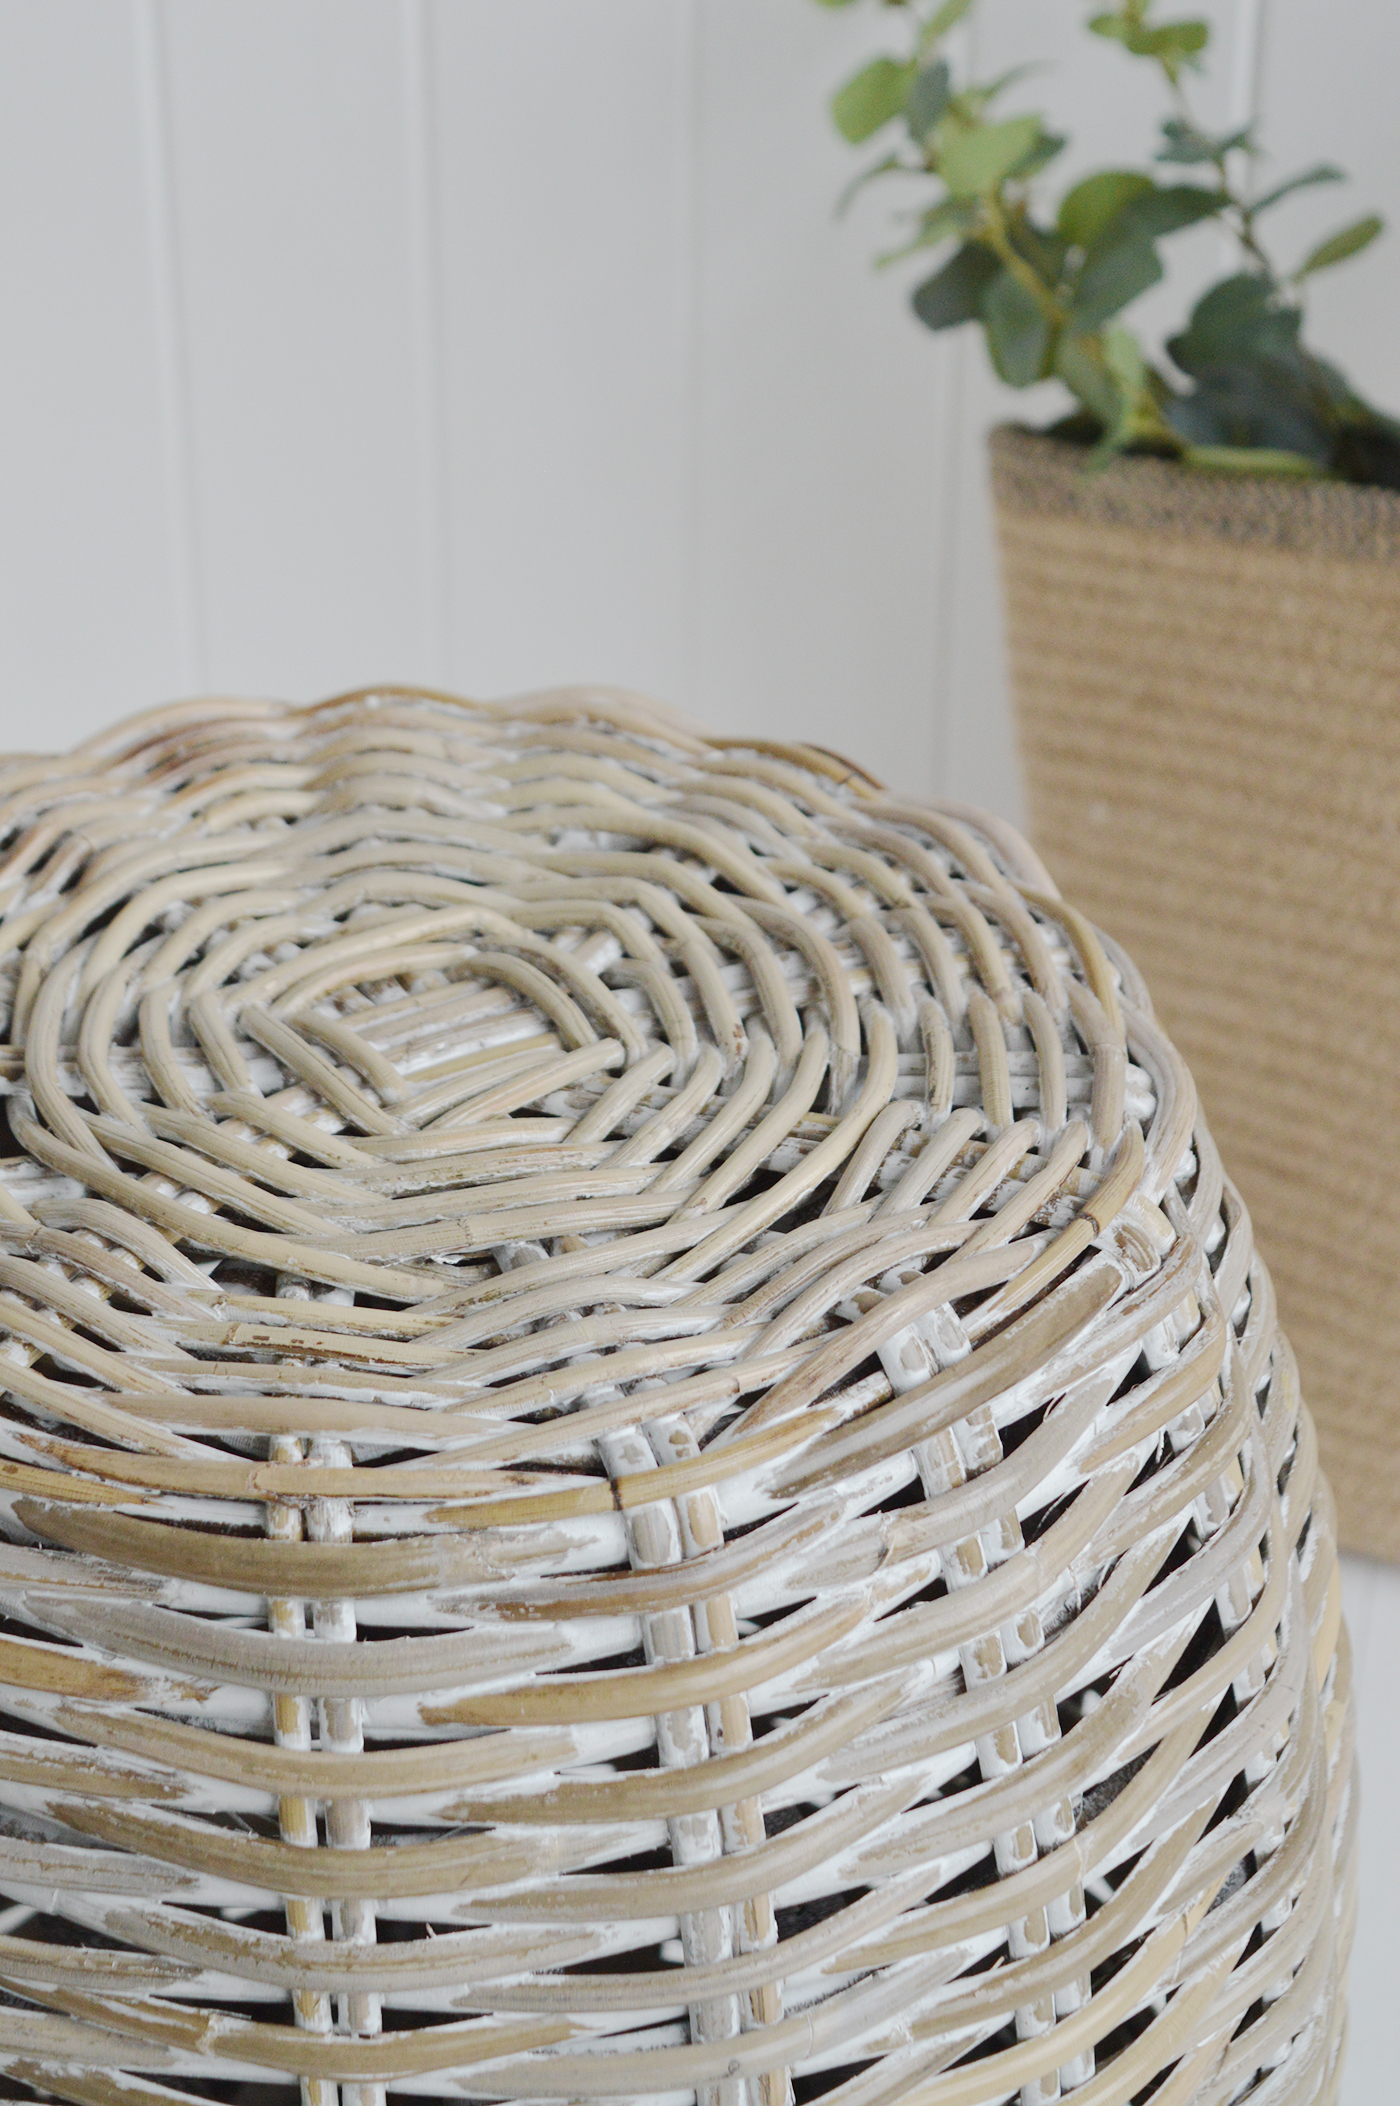 Oxford white wash willow seat or stool  - Ideal to add warmth with natural material in a coastal or New England living room interior decor from The White LIghthouse Furniture. Bathroom, Living Room, Bedroom and Hallway Furniture for beautiful homes